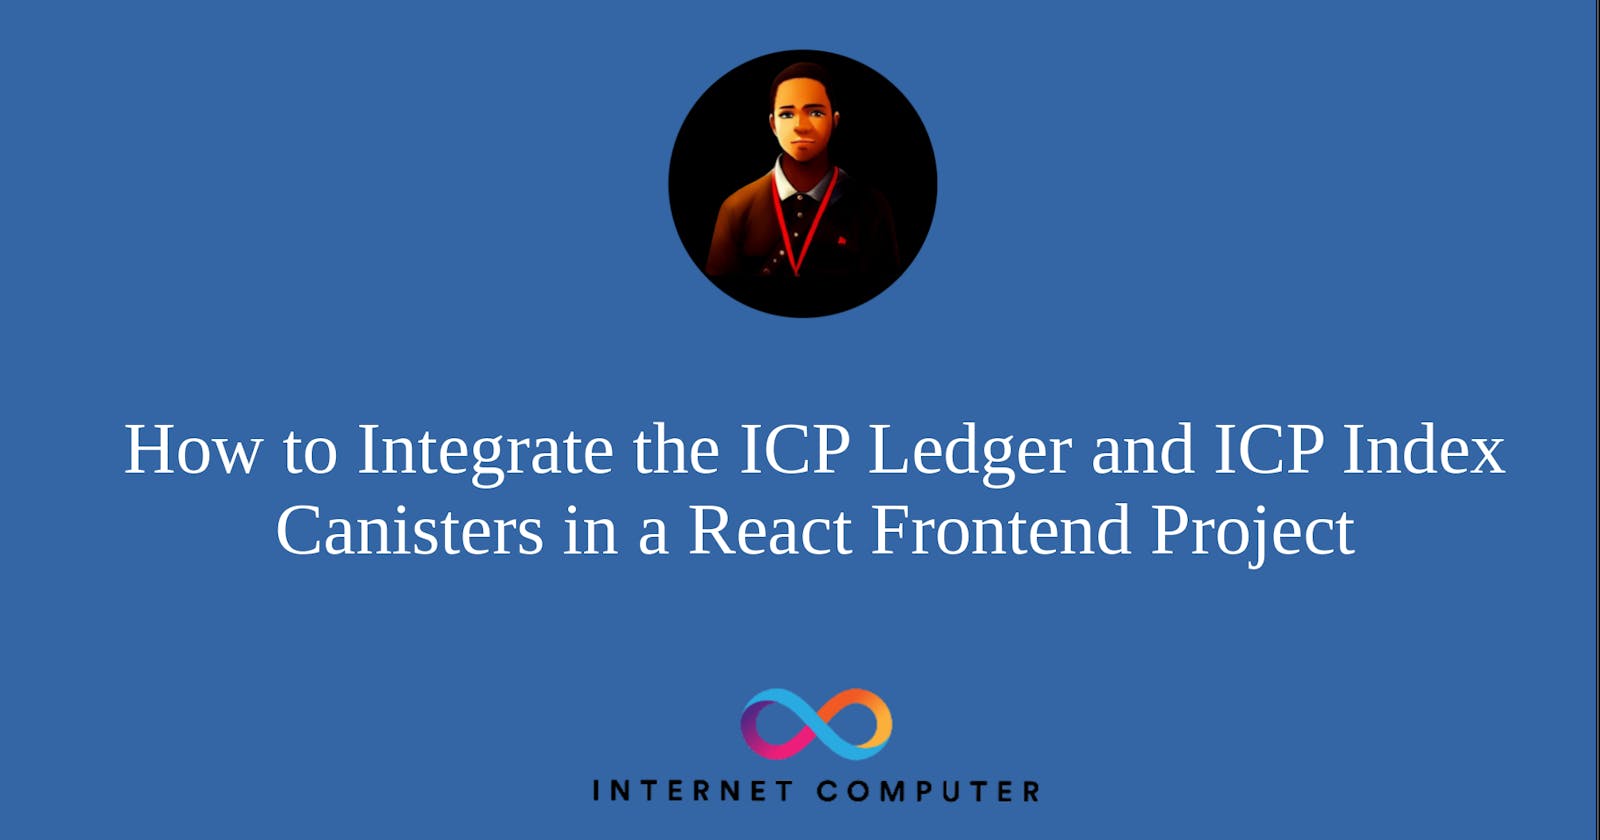 How to Integrate the ICP Ledger and ICP Index Canisters in a React Frontend Project